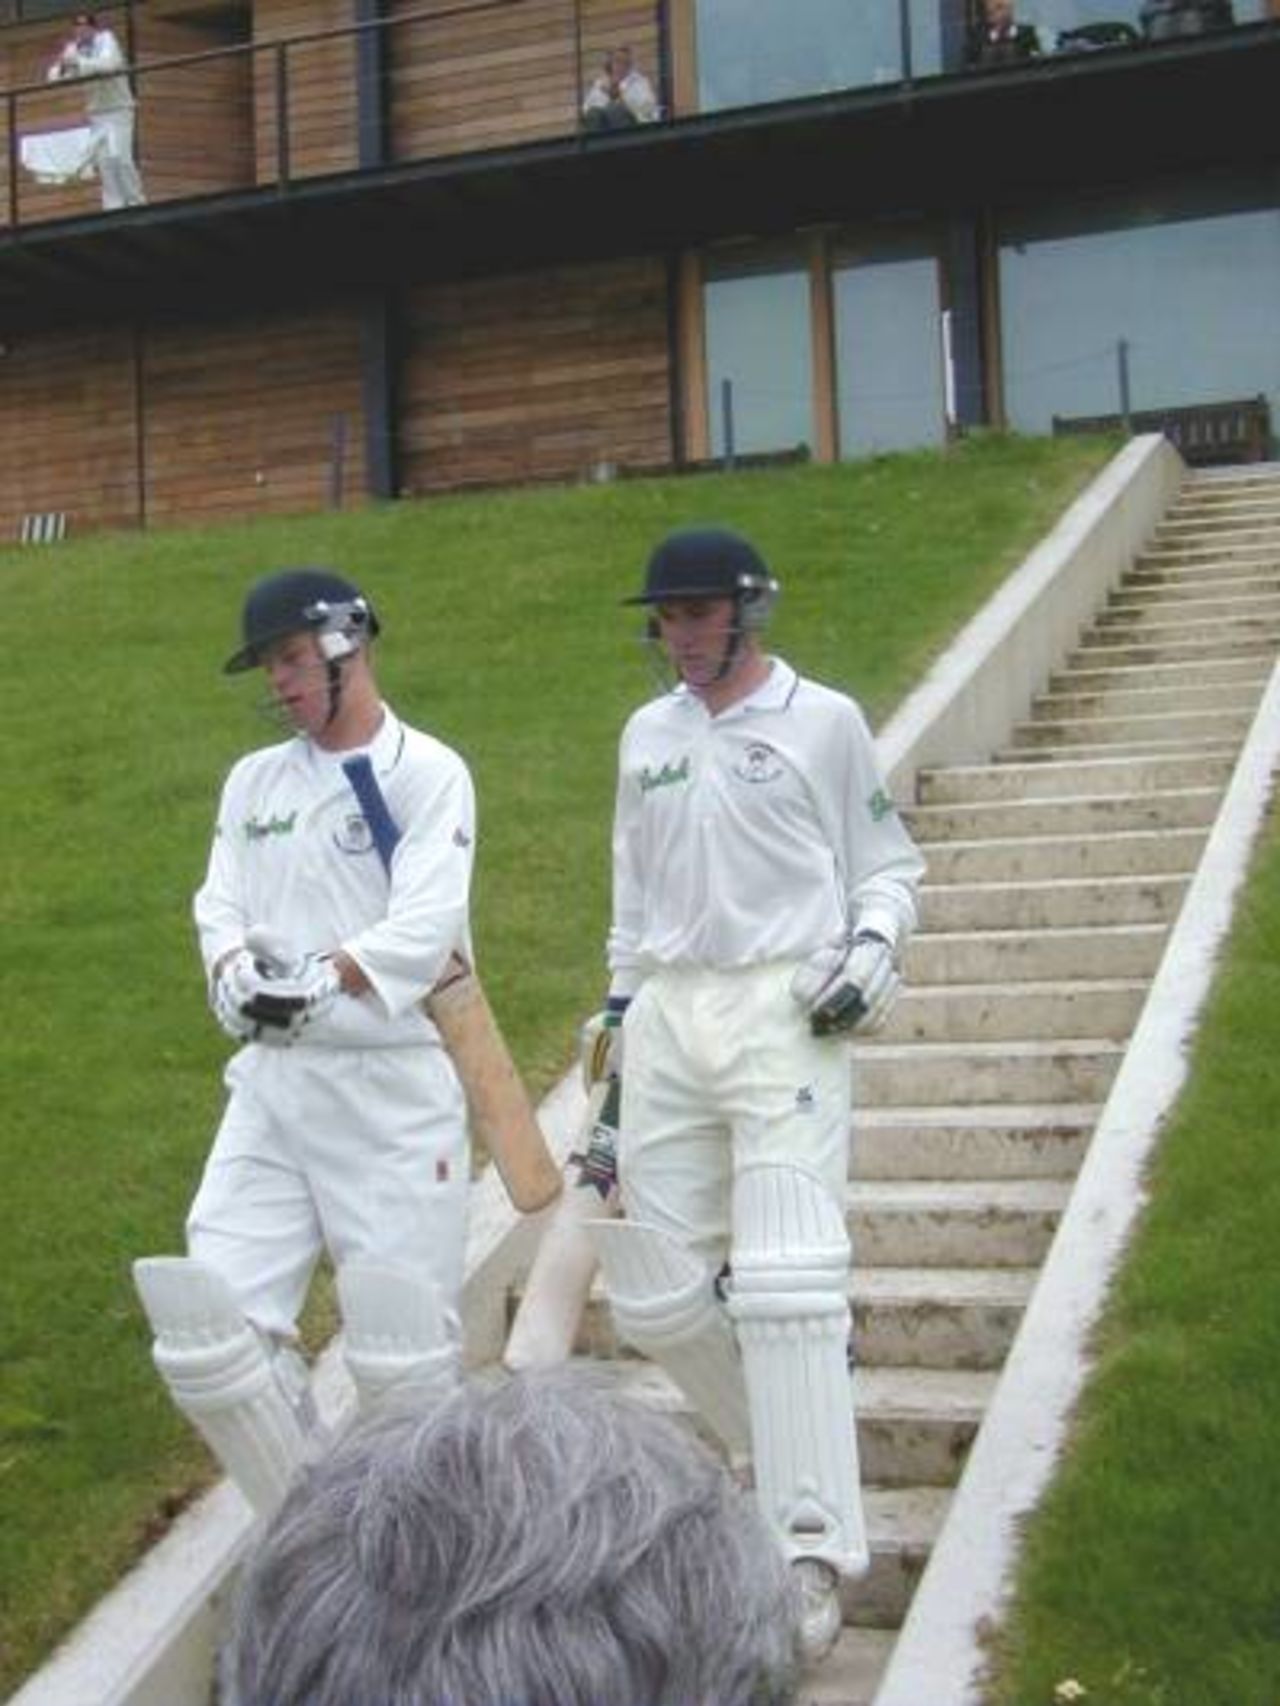 Openers James Adams and Andrew Sexton come in to bat